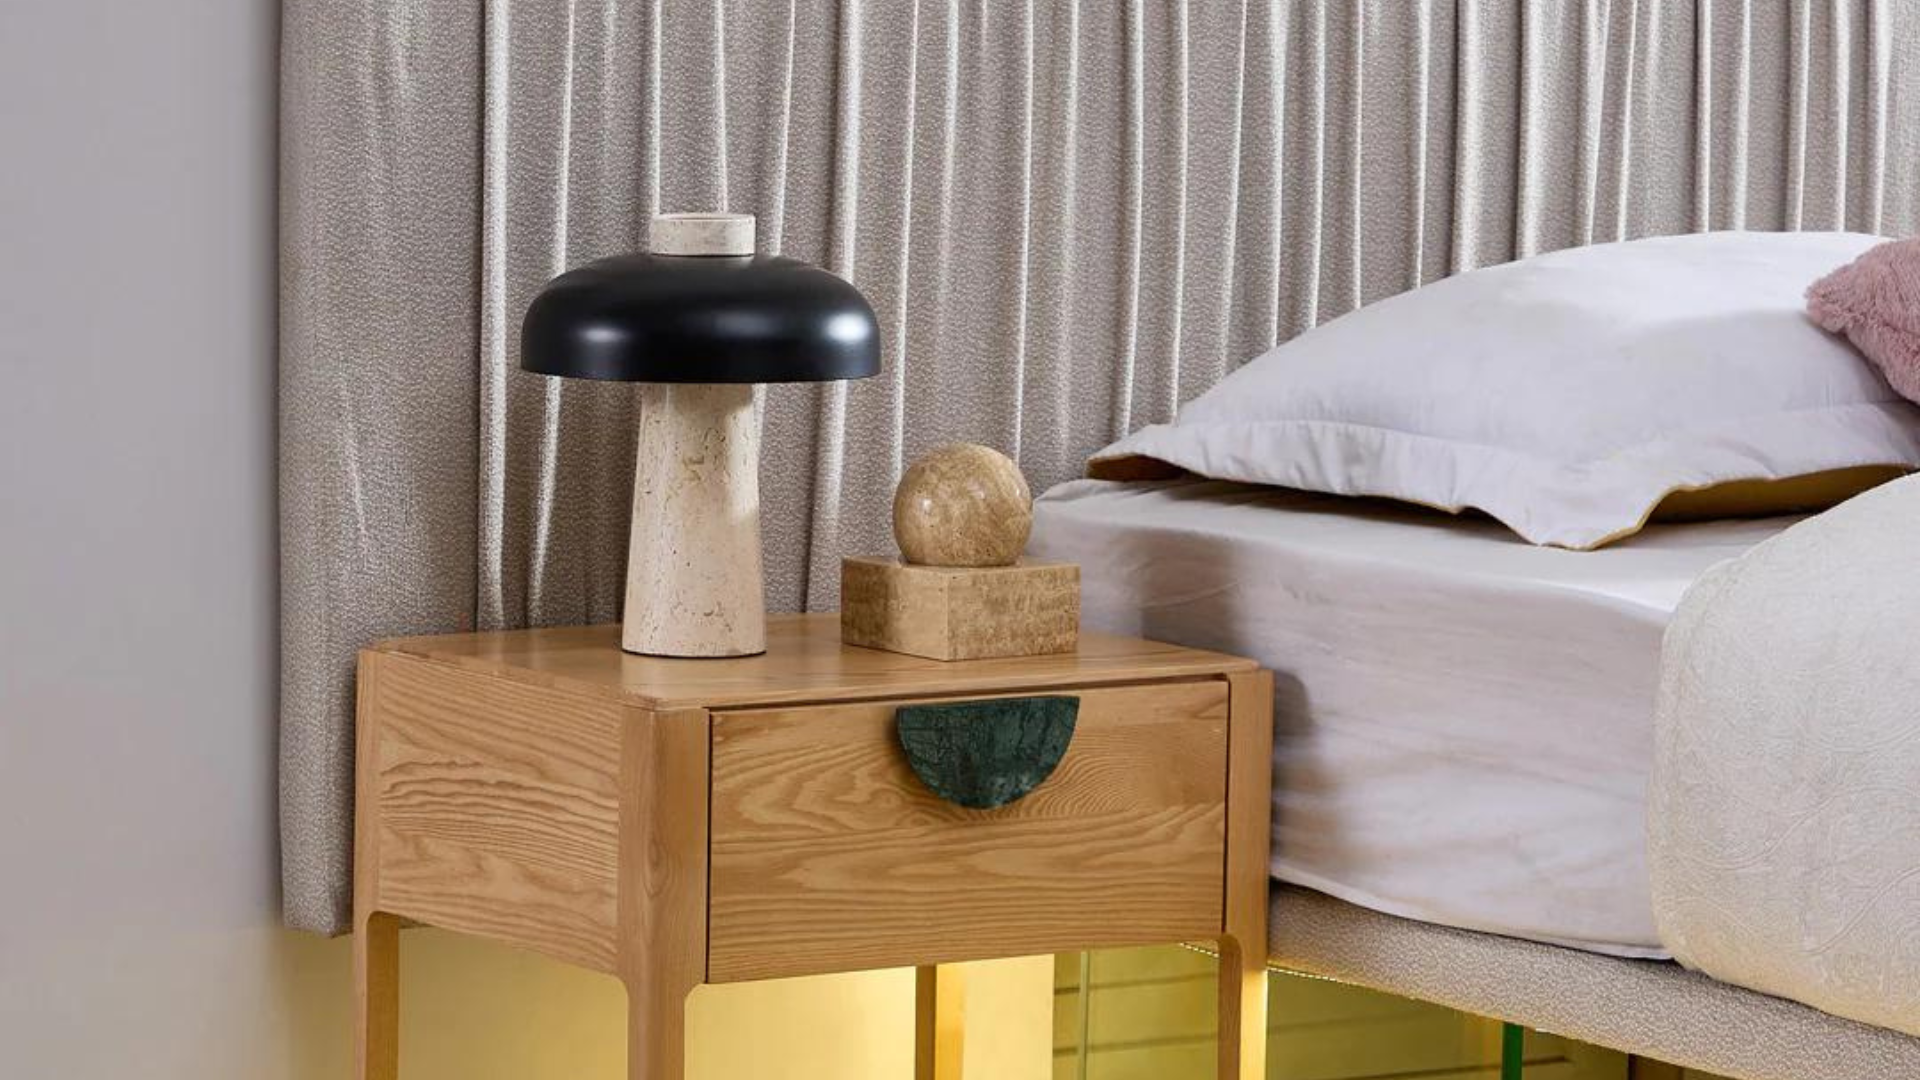 Sahara lamp with Pearl Marble Travertine Sculpture in Bedroom setting